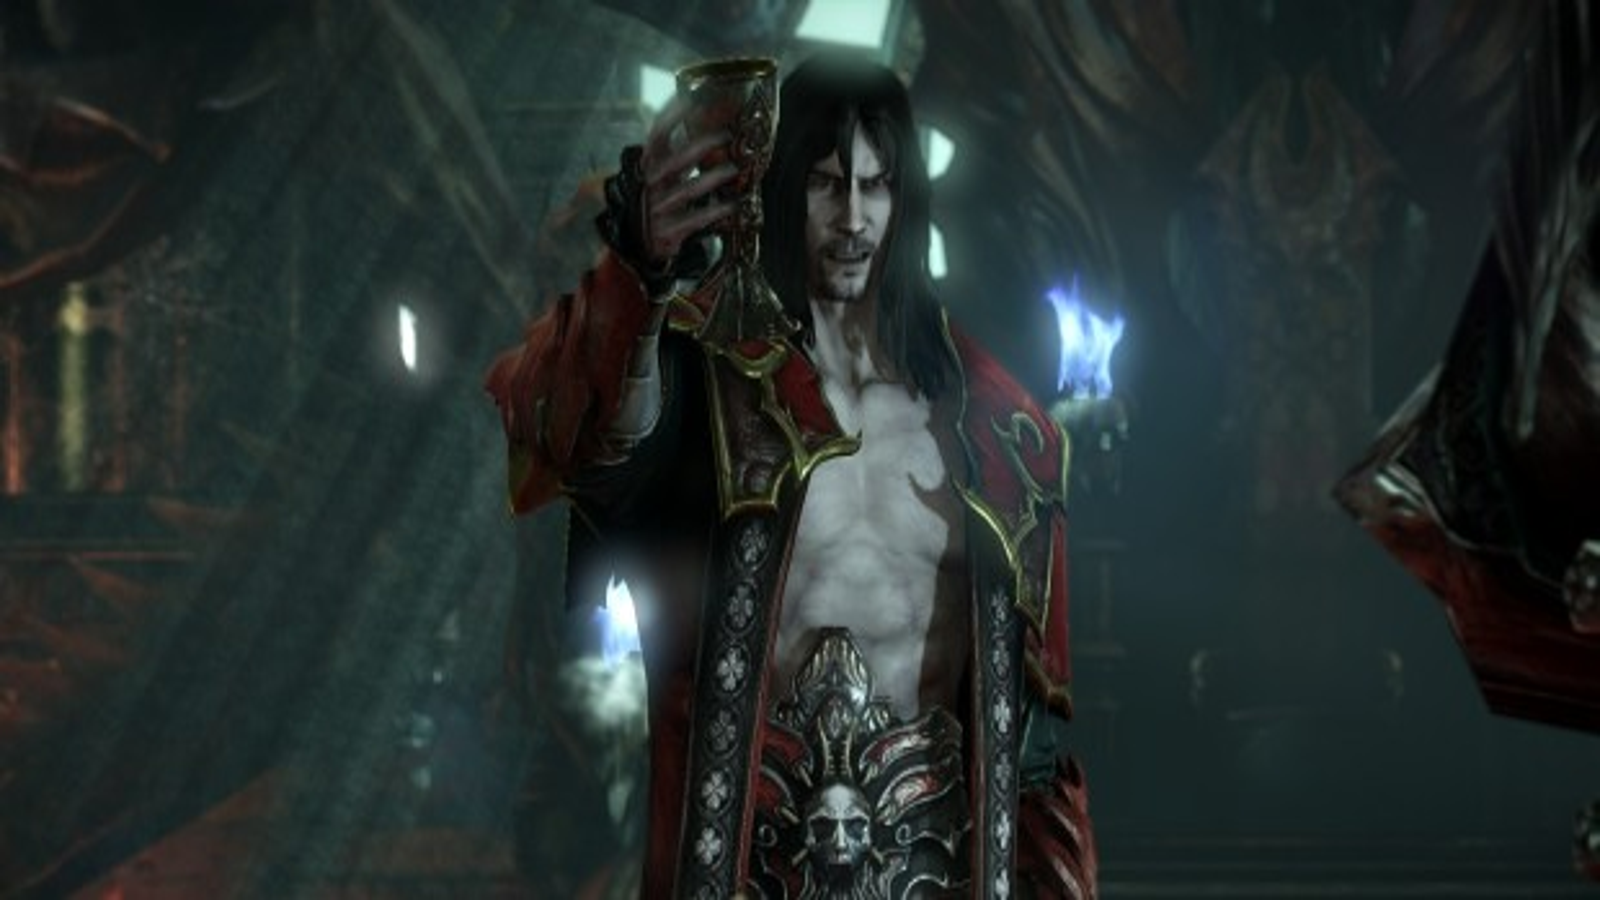 Thief and Castlevania: Lords of Shadow 2 Review Scores Not So Hot